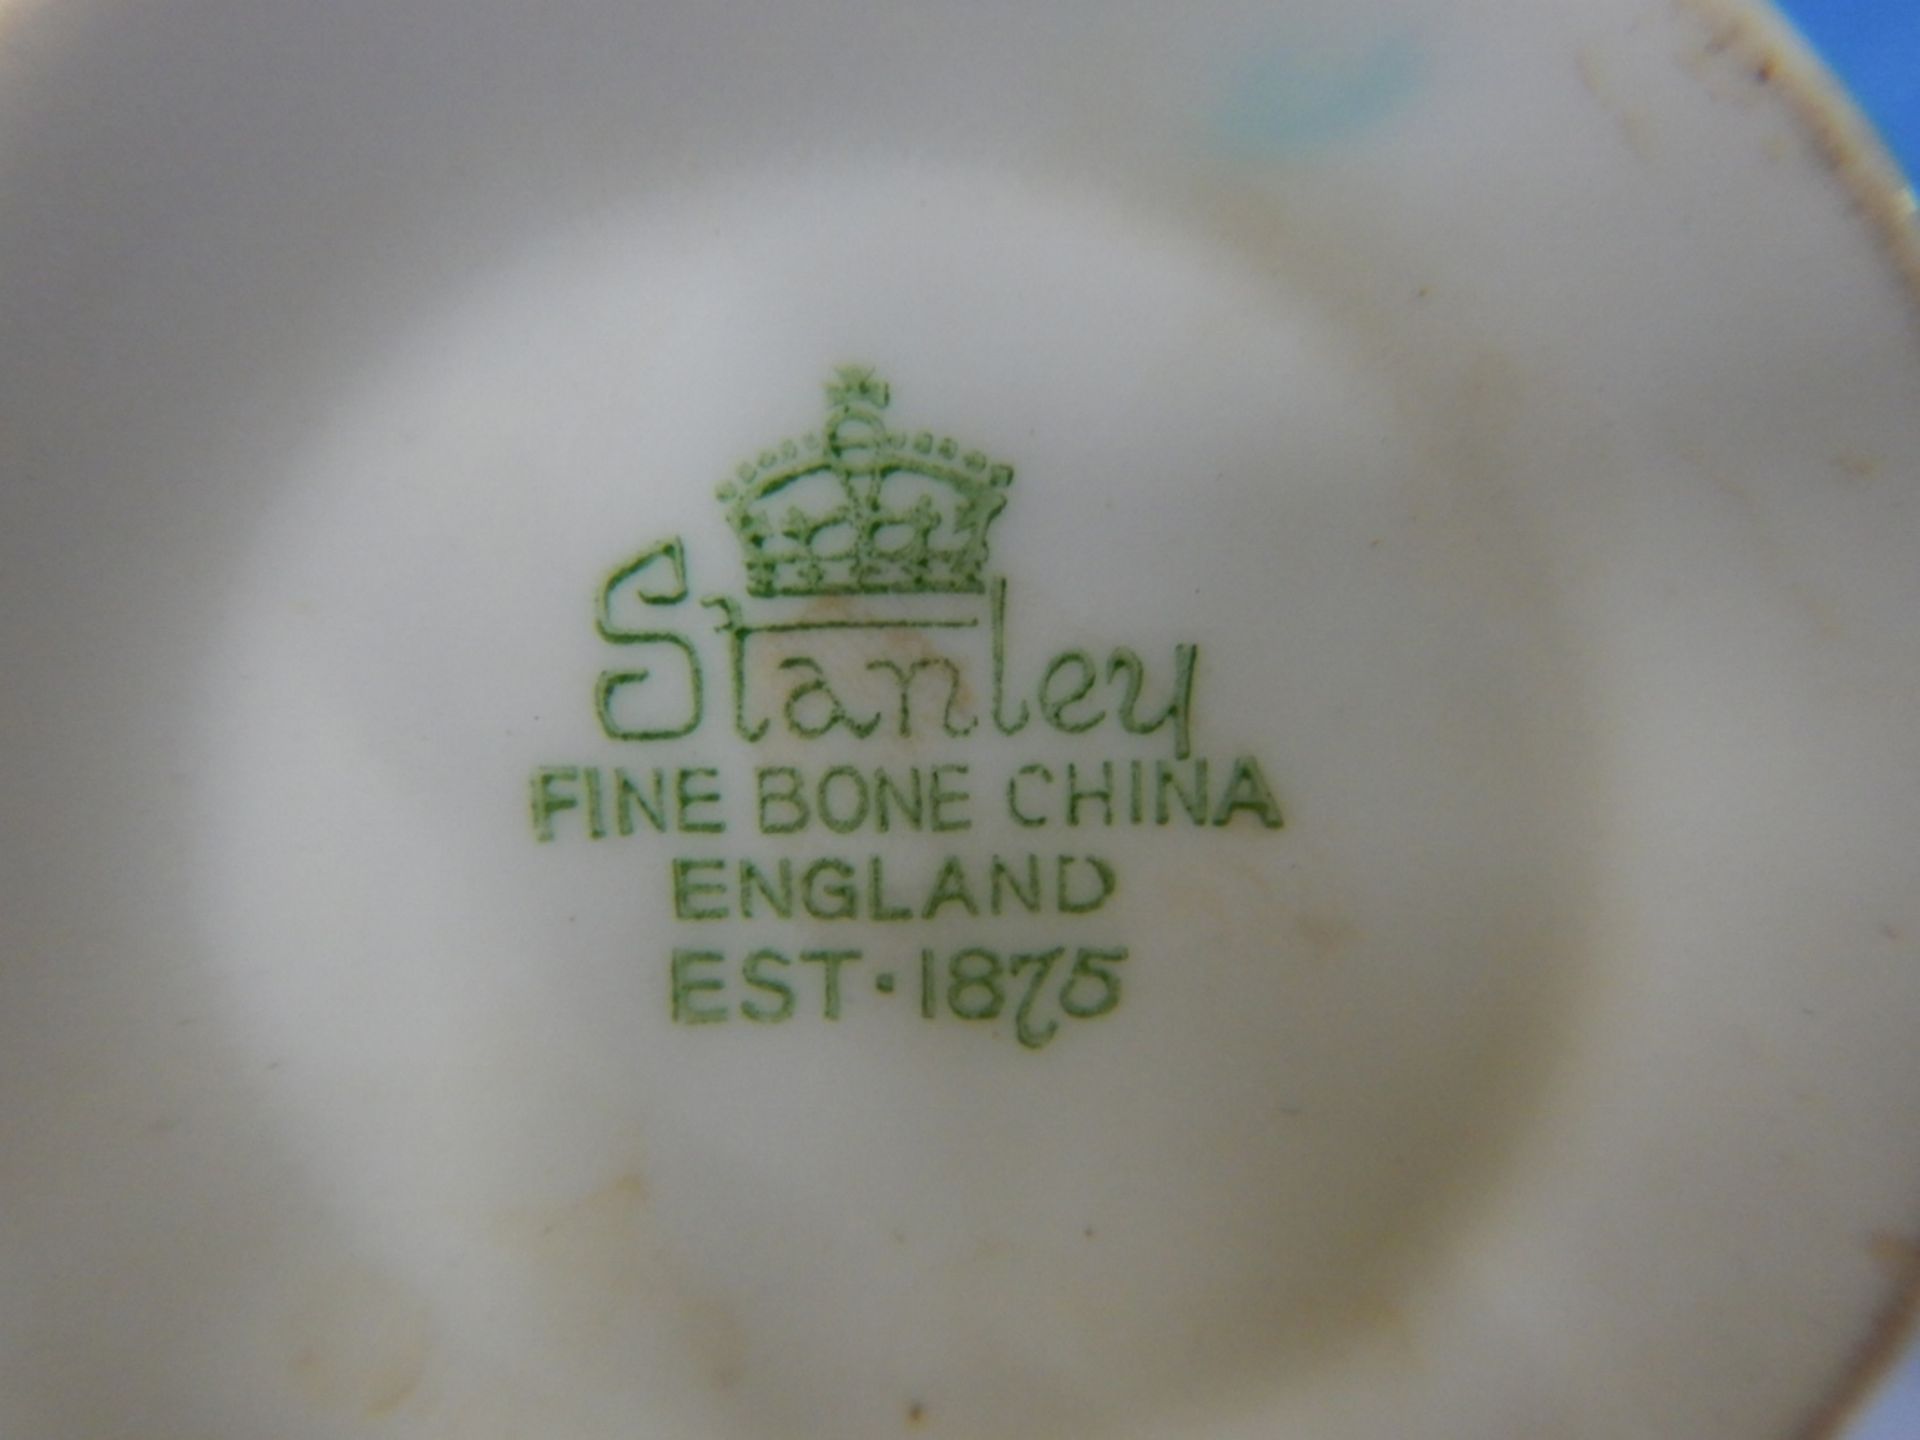 ANTIQUE TEACUPS & SAUCERS - MADE IN ENGLAND - LOT OF 2 - FINE BONE CHINA EST. 1875 "STANLEY" - # - Image 11 of 12